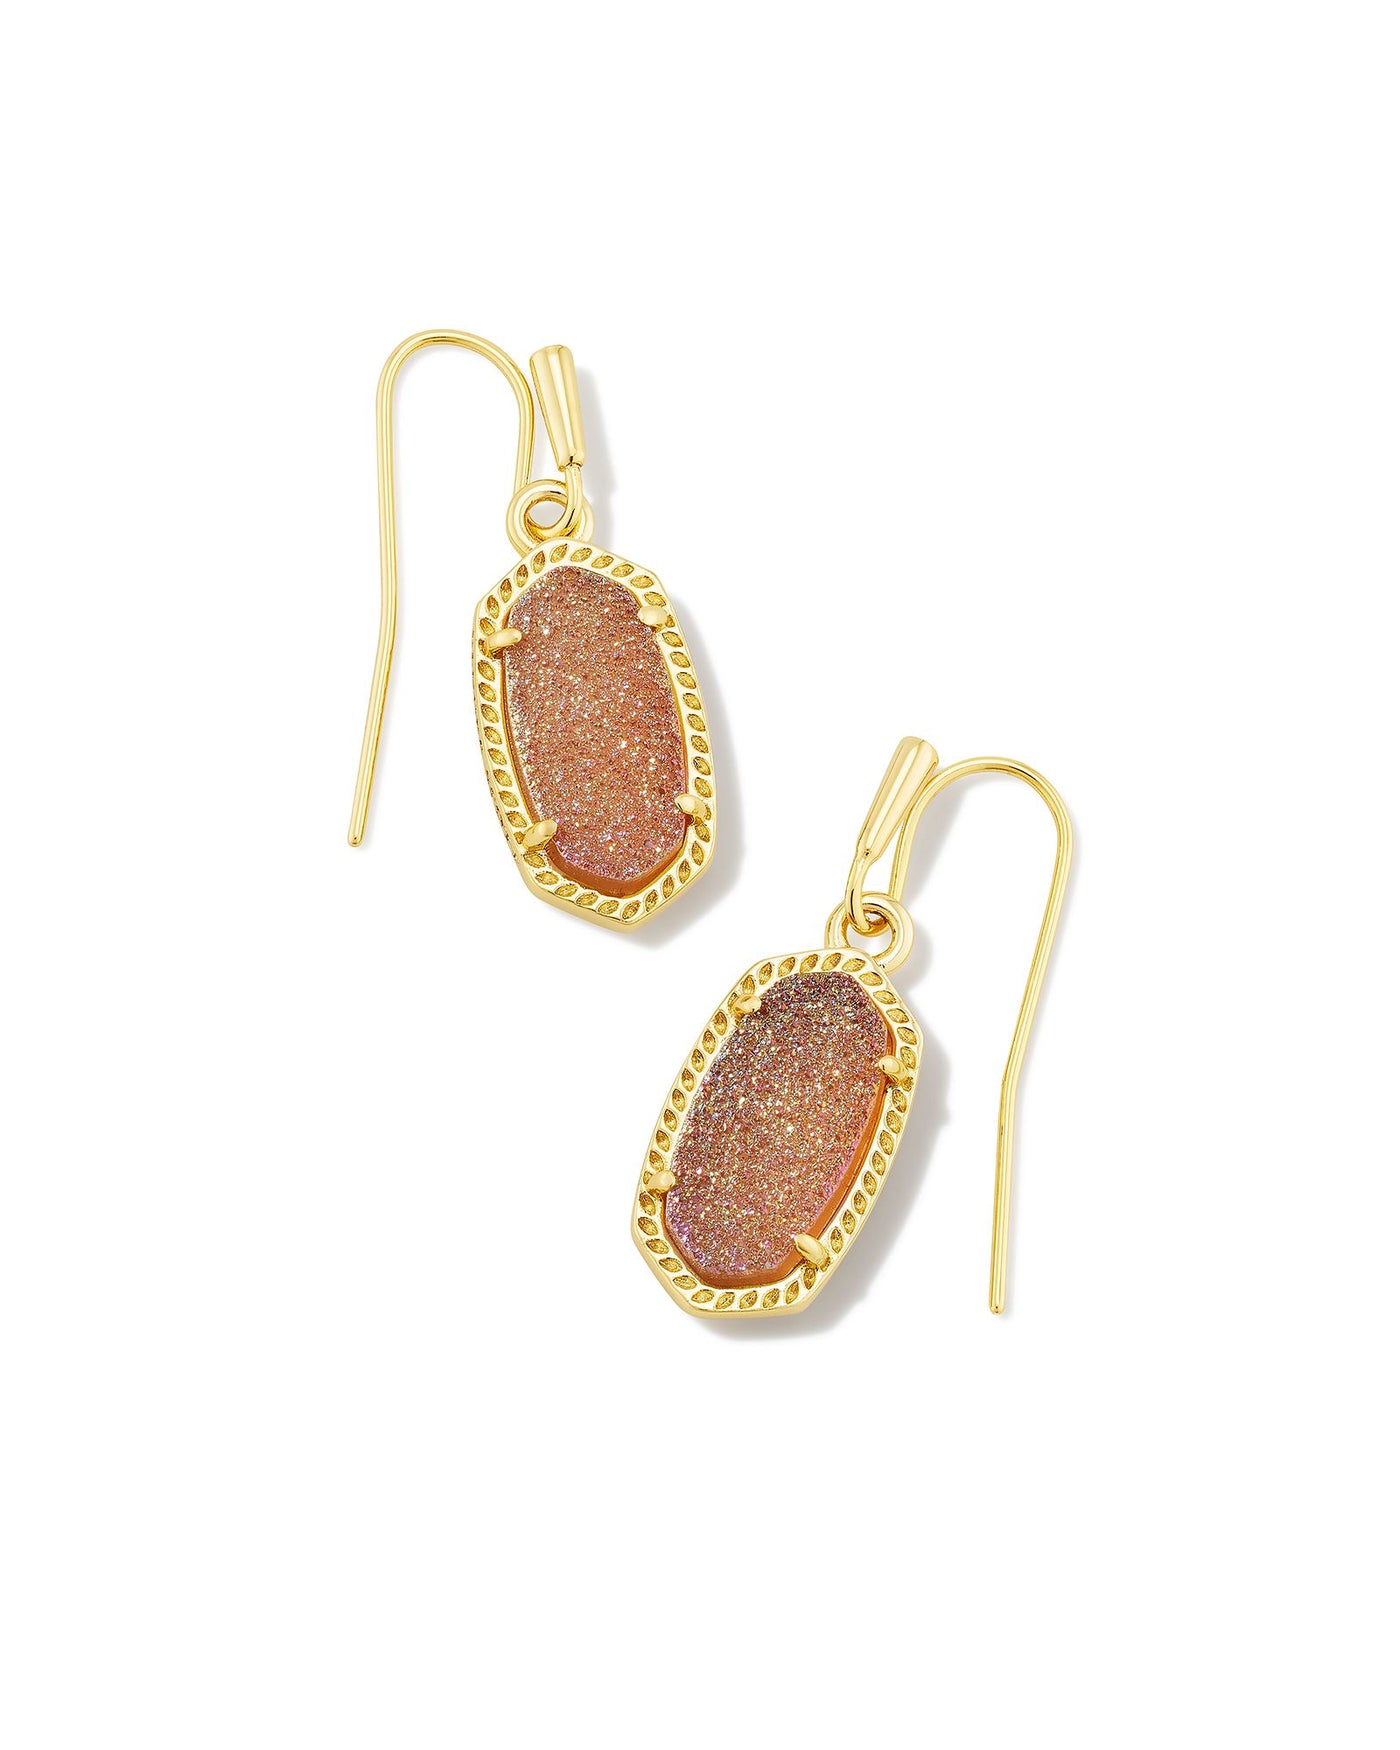 Kendra Scott Lee Earrings In Gold Spice Drusy-Earrings-Kendra Scott-Market Street Nest, Fashionable Clothing, Shoes and Home Décor Located in Mabank, TX